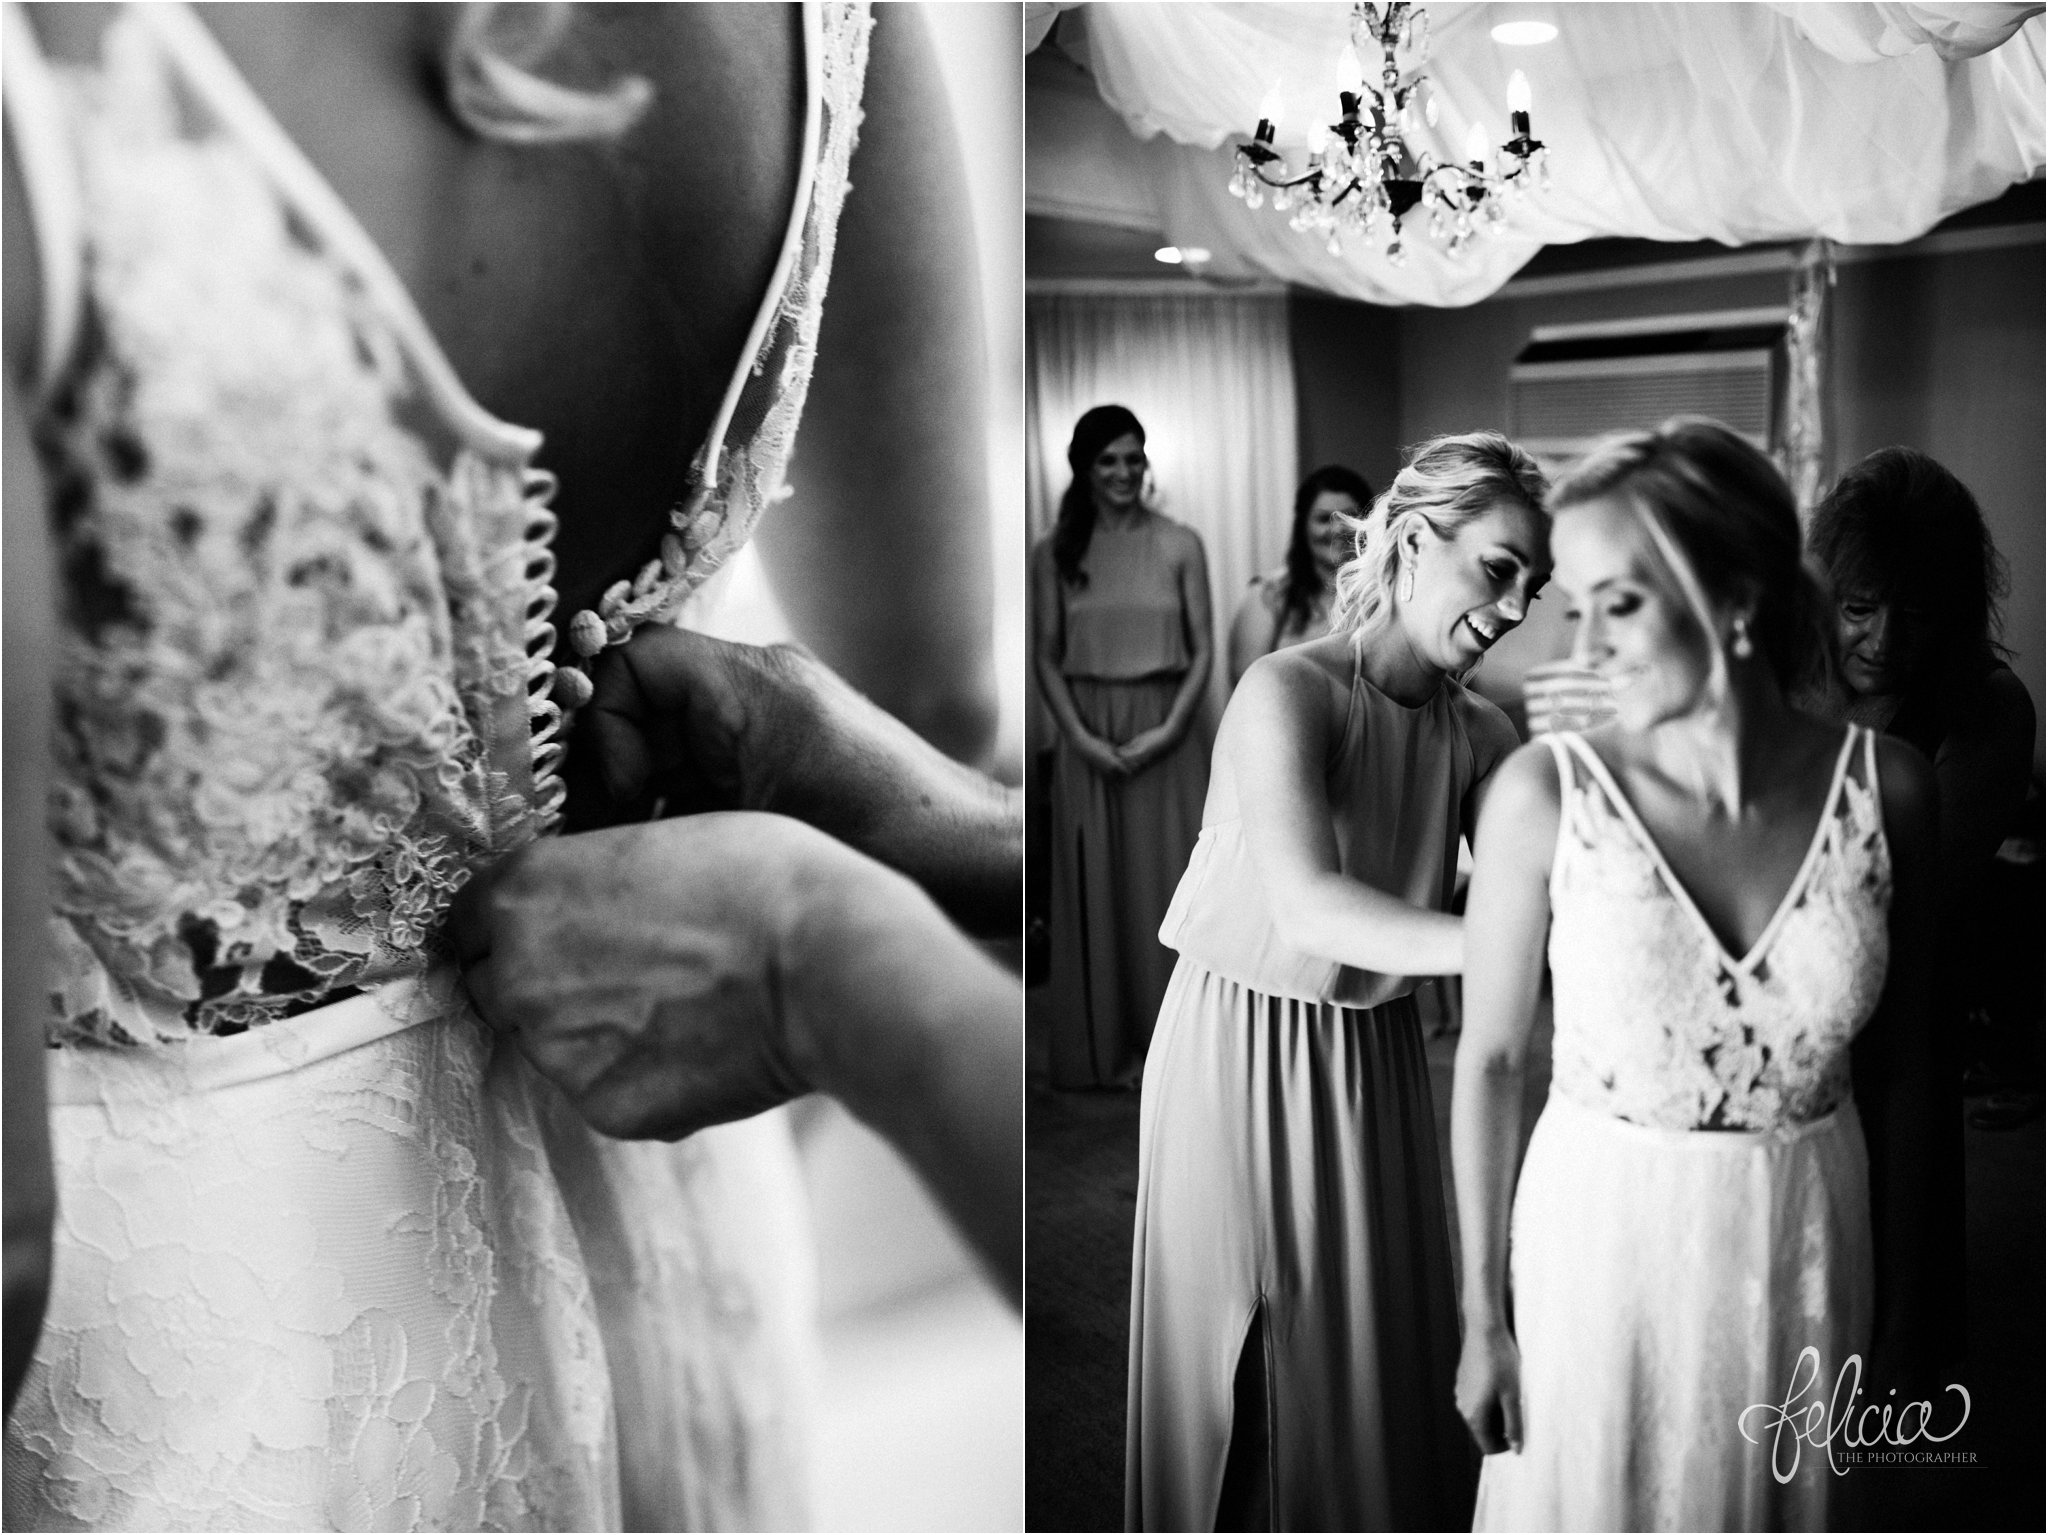 images by feliciathephotographer.com | destination wedding | the makey house | dave gibson coordinator | travel photographer | Savannah, georgia | southern | getting ready | details | black and white | getting into the gown | friends | buttoning | lace dress | ladies of lineage | 